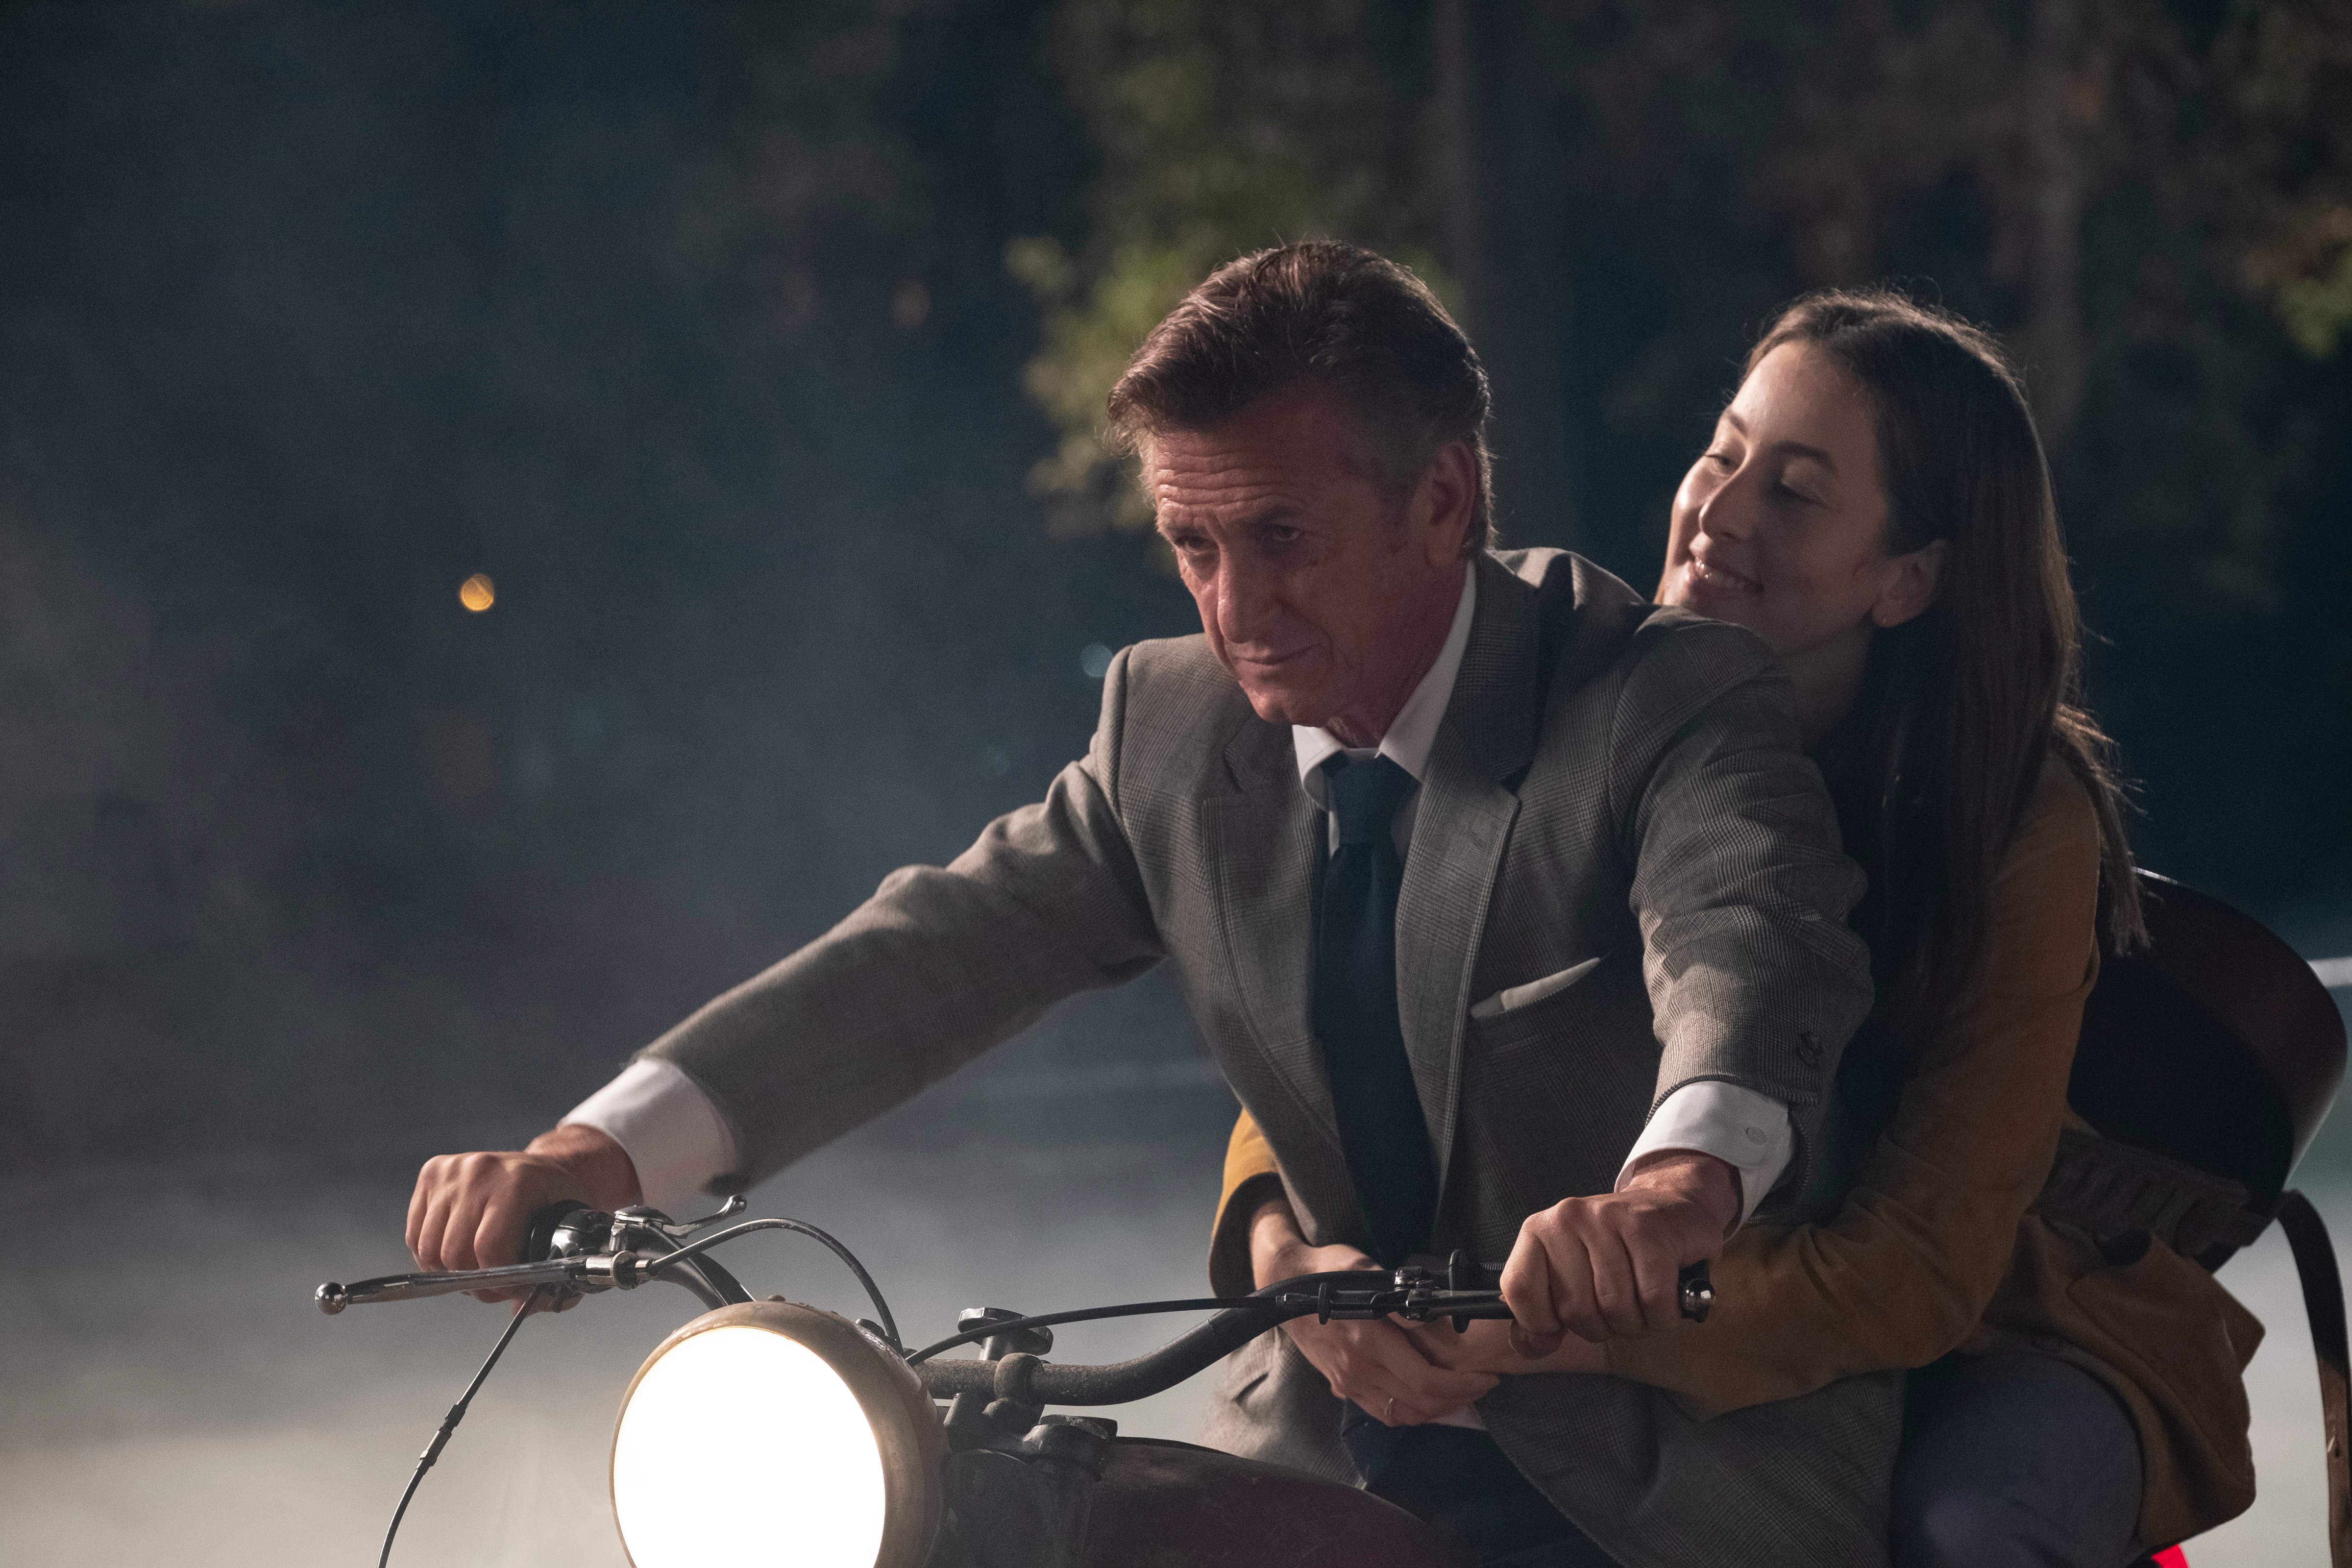 Haim (right) on the back of a motorcycle driven by Sean Penn (Melinda Sue Gordon—© 2021 Metro-Goldwyn-Mayer Pictures Inc. All Rights Reserved.)